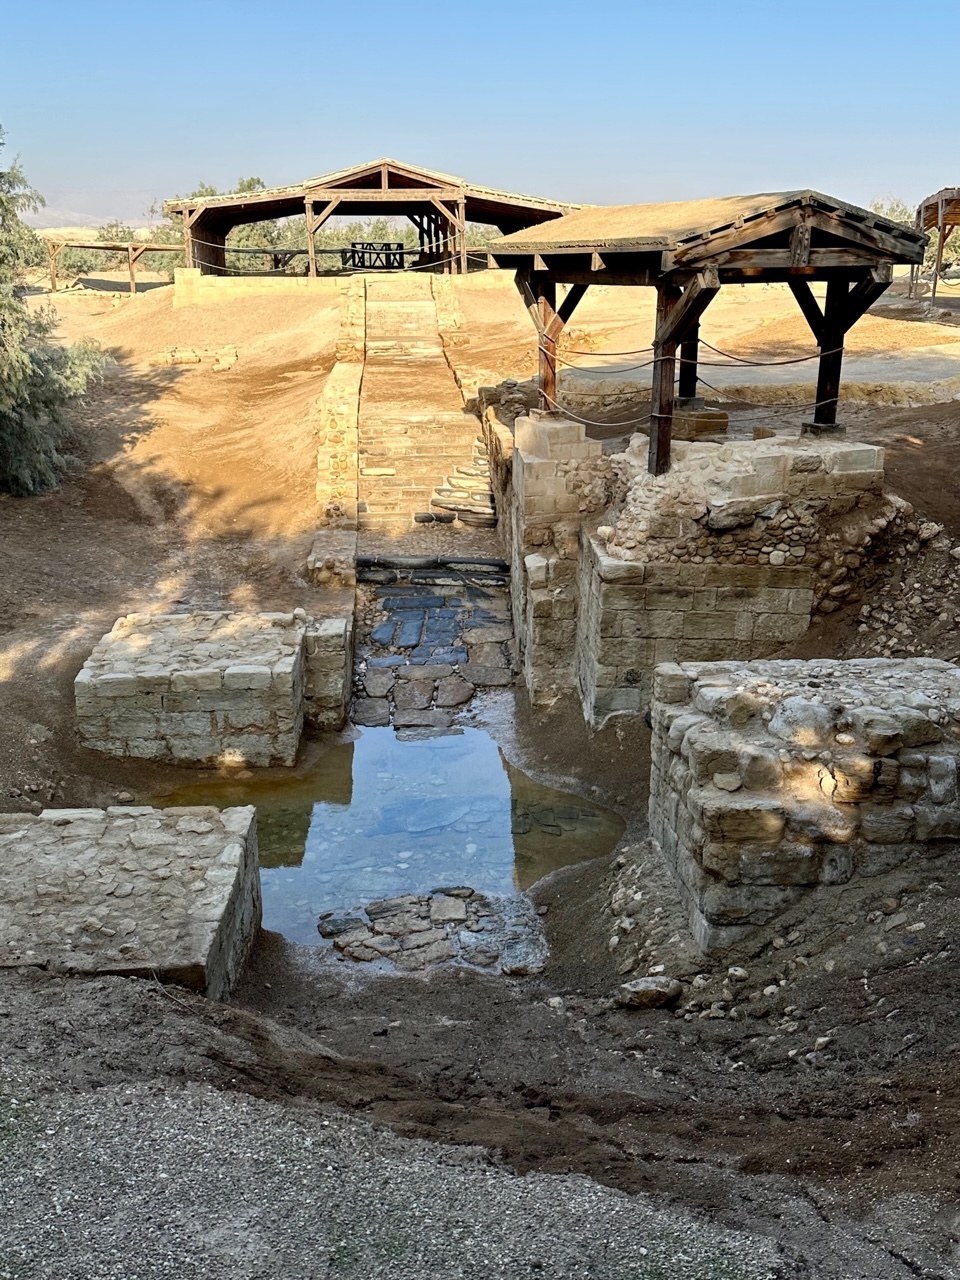 In this small pool, in Bethany, between the San Juan stream and the Jordan River, it is believed that Jesus of Nazareth was baptized.